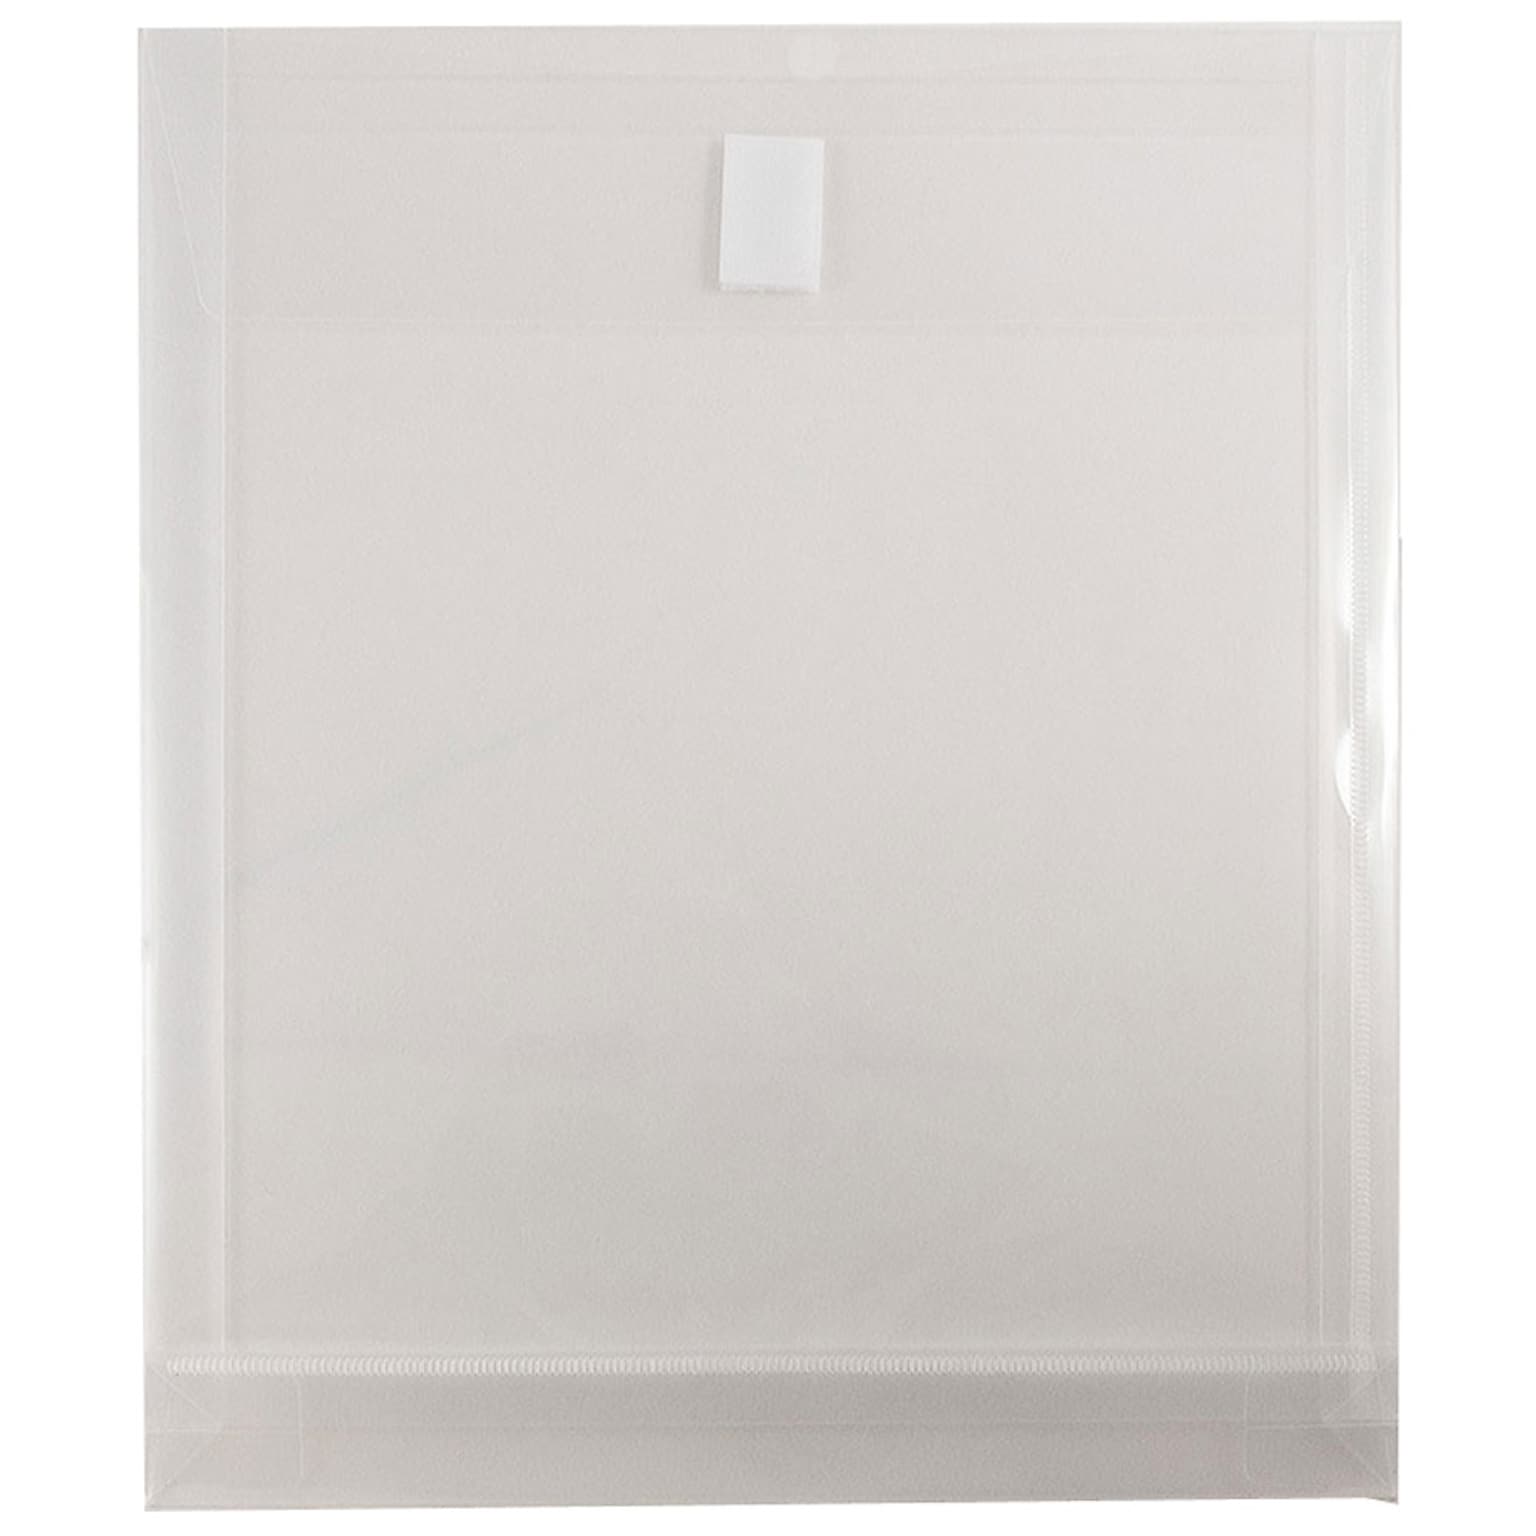 JAM Paper® Plastic Envelopes with Hook & Loop Closure, 9.75 x 11.75 with 1 Inch Expansion, Clear, 12/Pack (118V1CL)